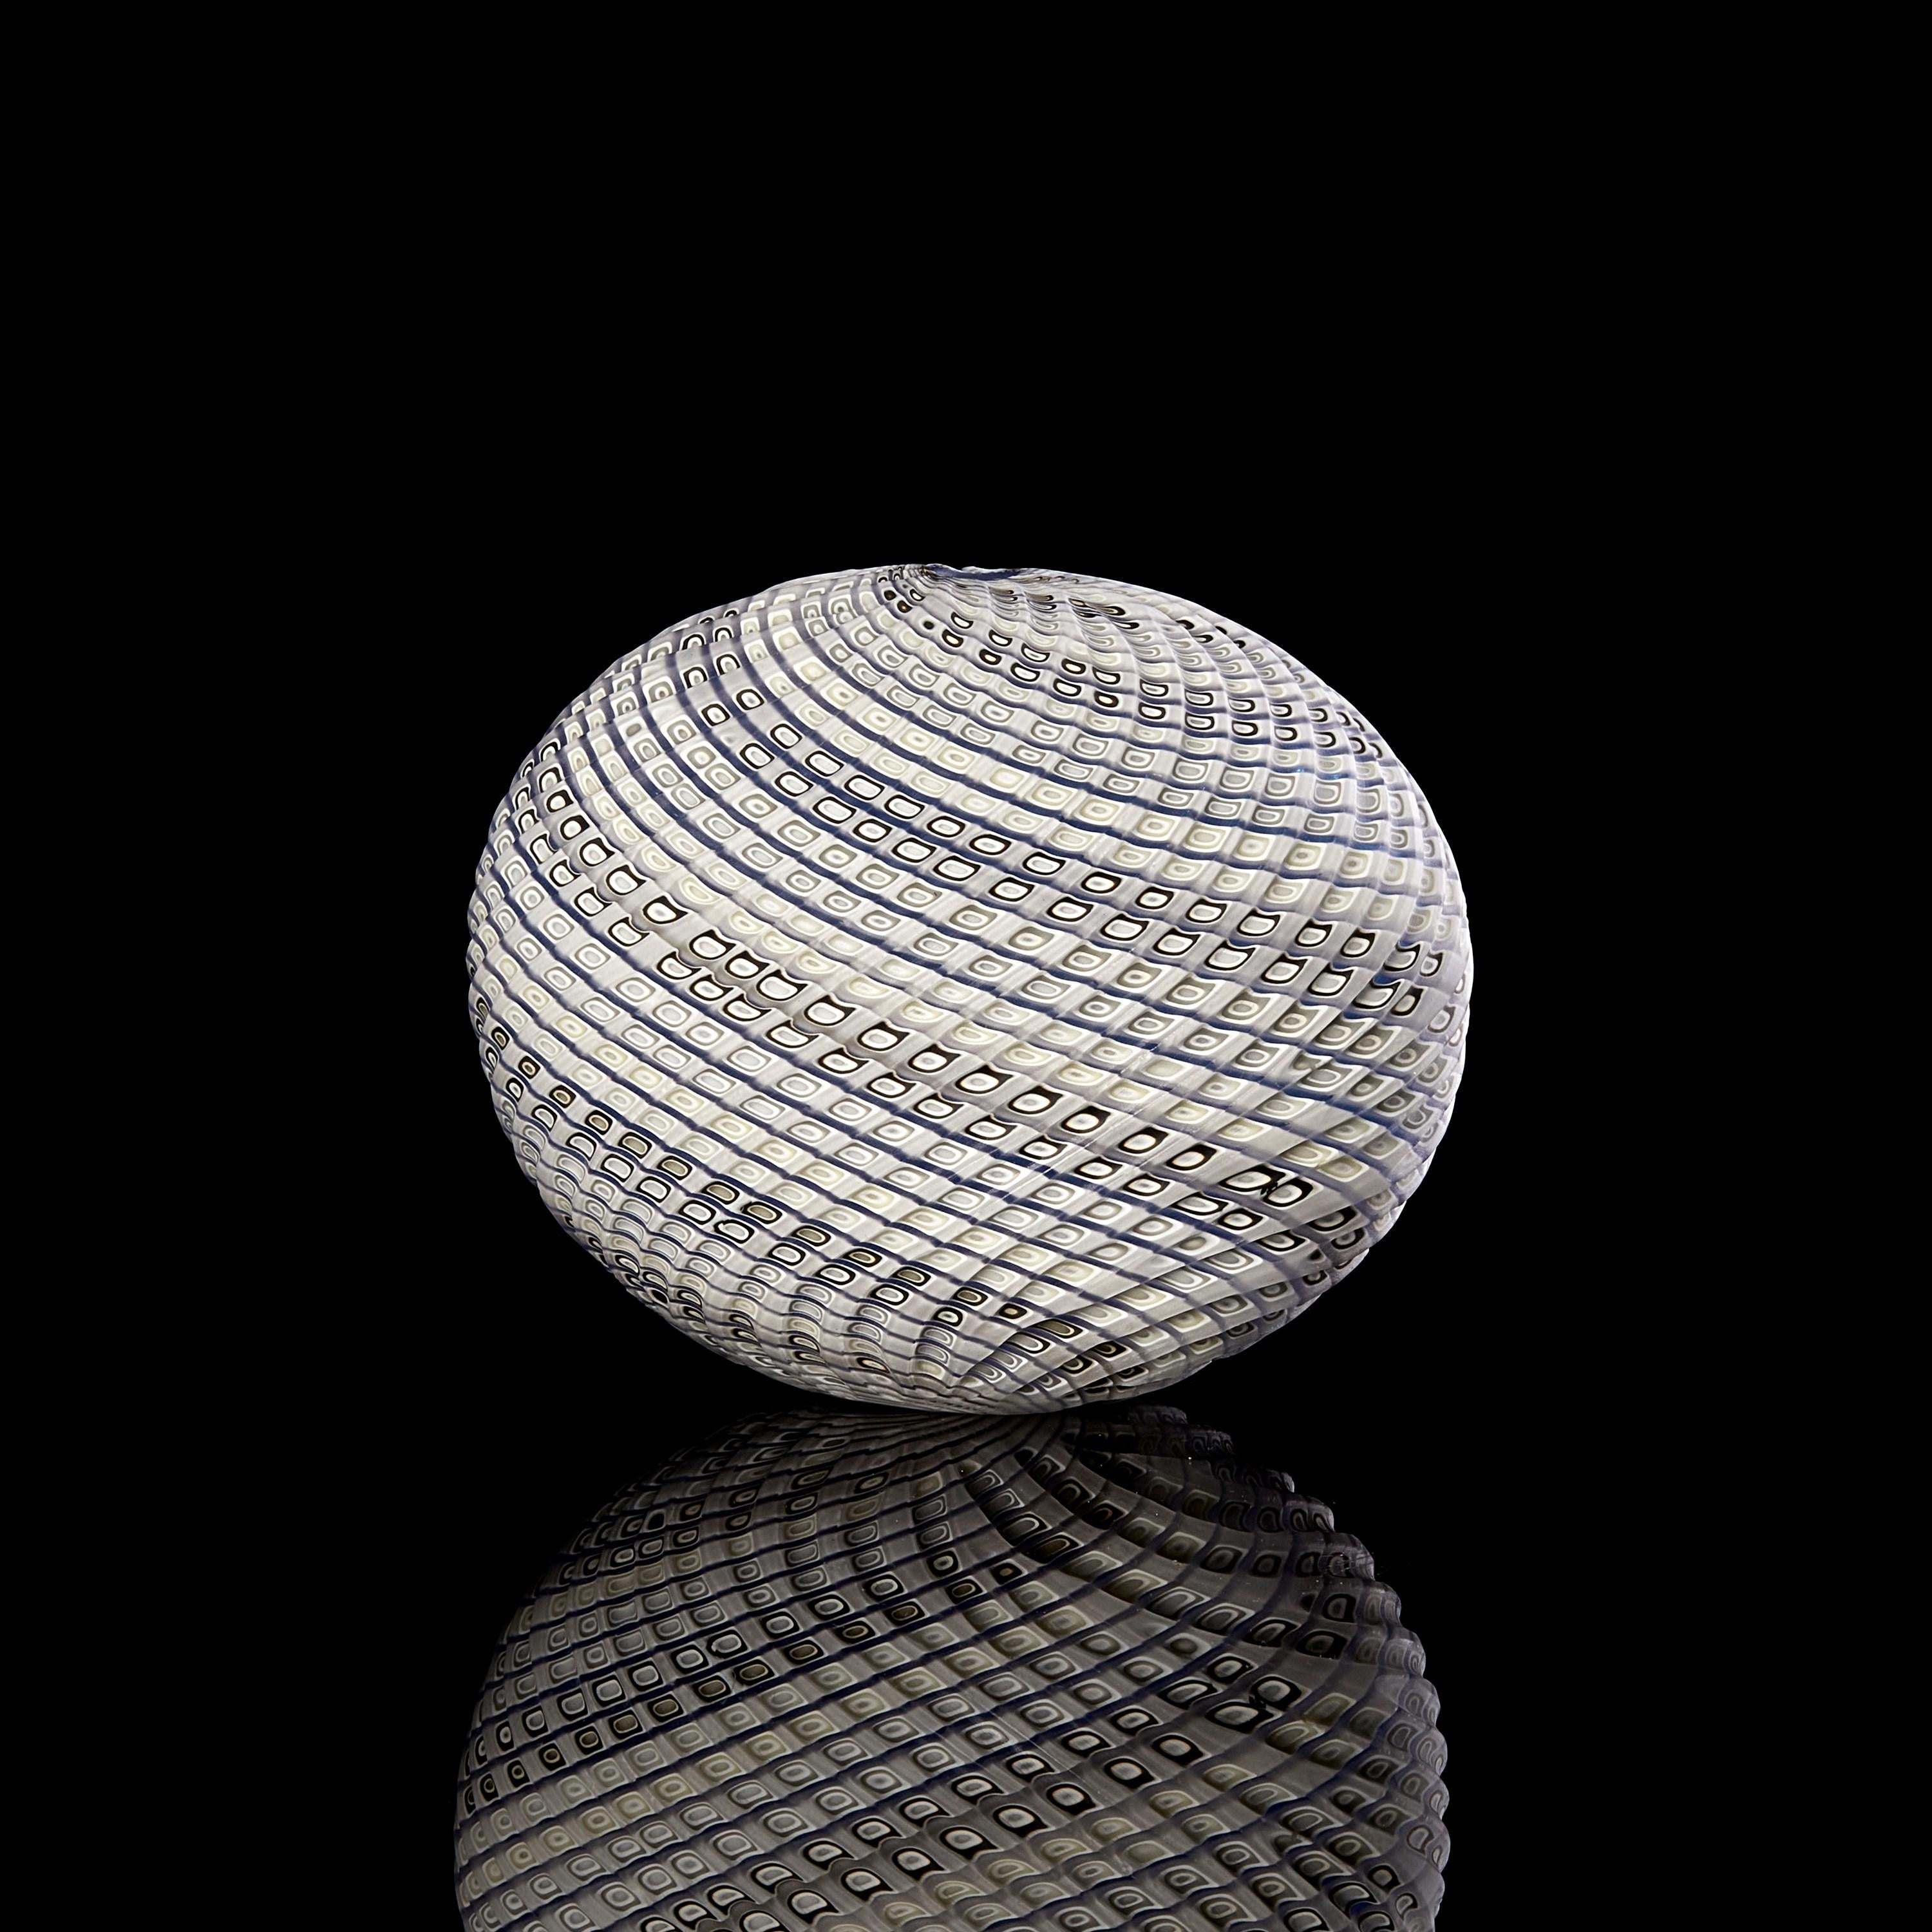 British Woven Three Tone Blue Pebble, textured glass sculptural object by Layne Rowe For Sale